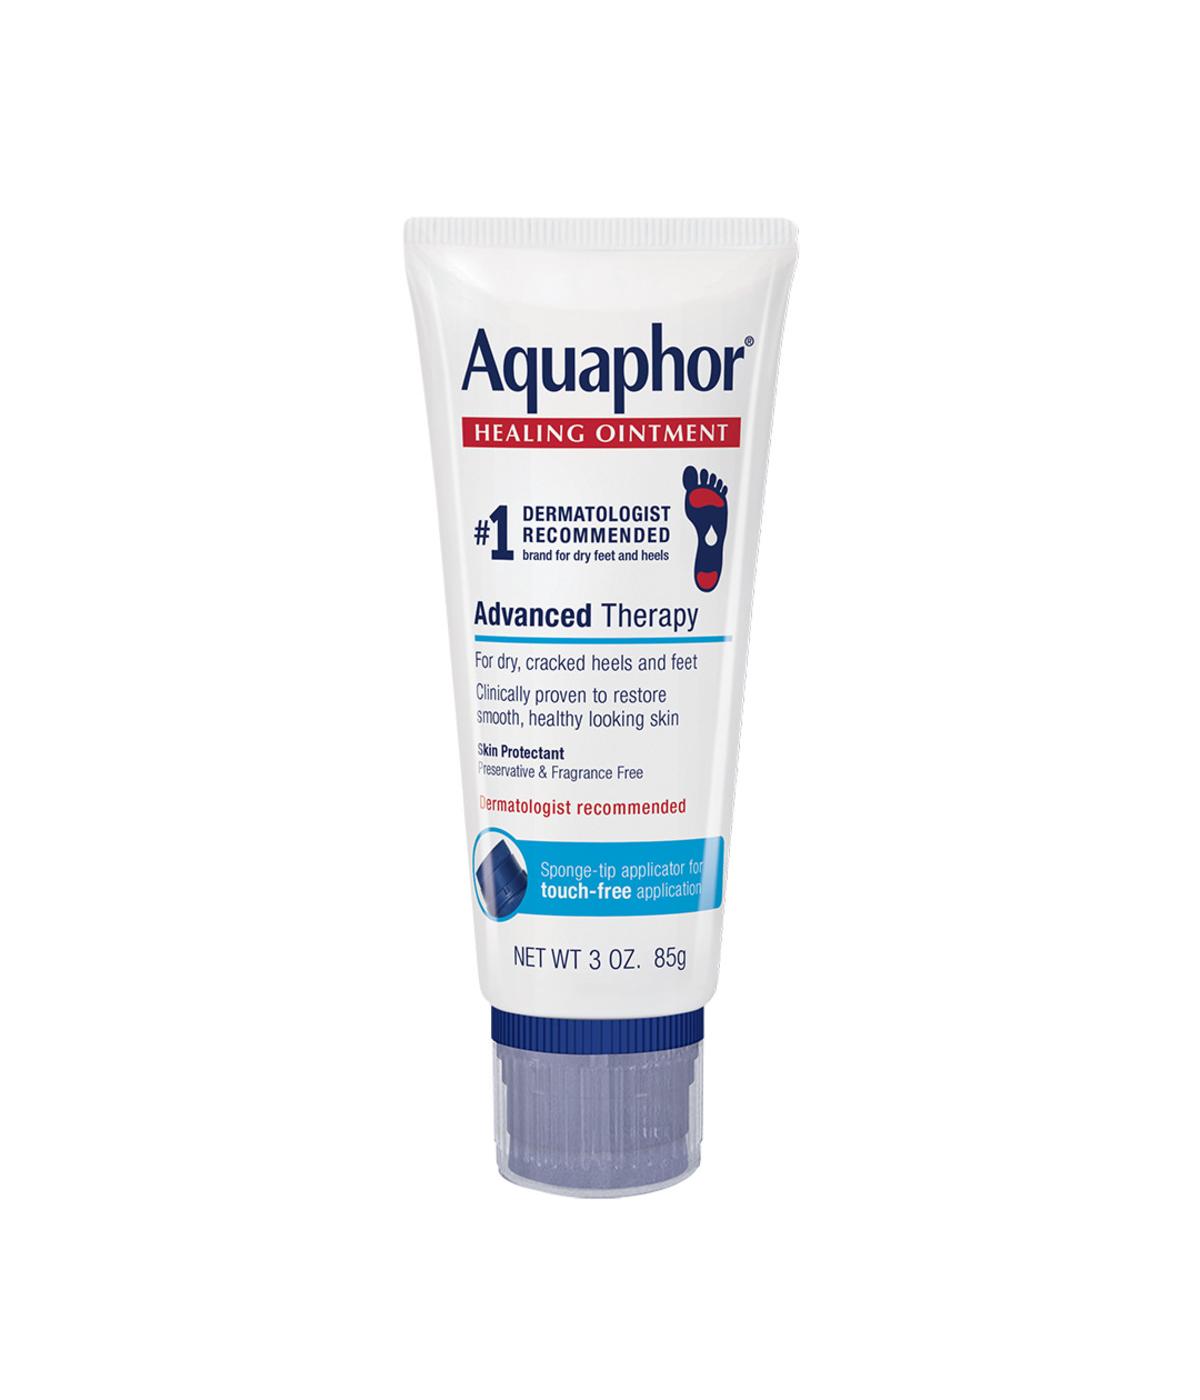 Aquaphor Healing Ointment with Touch-Free Applicator for Feet Tube; image 1 of 2